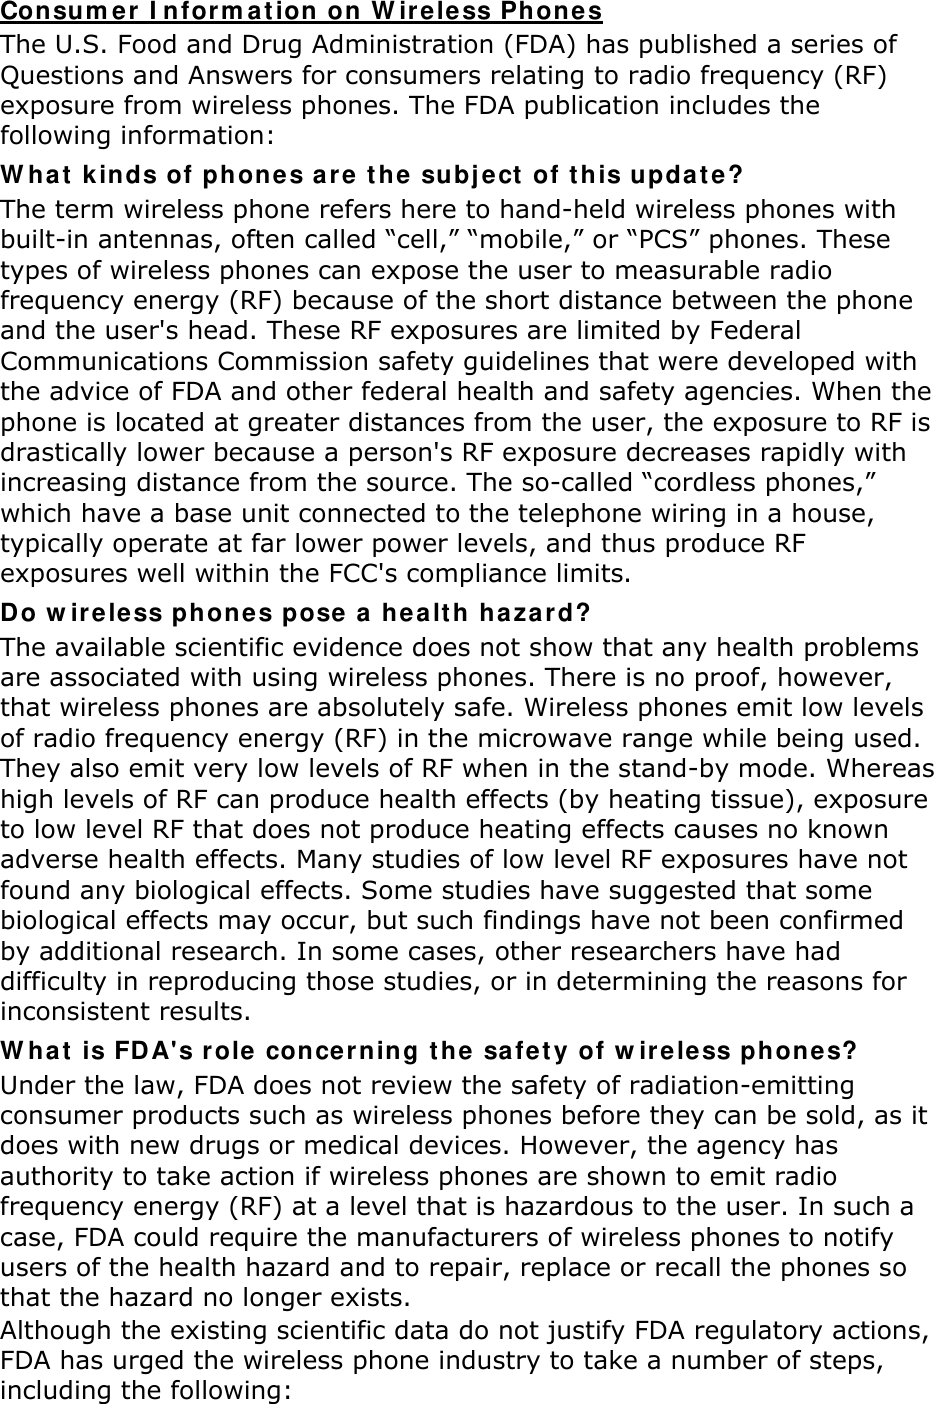 Consum er I nfor m a tion on W irele ss Phone s The U.S. Food and Drug Administration (FDA) has published a series of Questions and Answers for consumers relating to radio frequency (RF) exposure from wireless phones. The FDA publication includes the following information: W hat kinds of phones are the subj e ct  of t his upda t e? The term wireless phone refers here to hand-held wireless phones with built-in antennas, often called “cell,” “mobile,” or “PCS” phones. These types of wireless phones can expose the user to measurable radio frequency energy (RF) because of the short distance between the phone and the user&apos;s head. These RF exposures are limited by Federal Communications Commission safety guidelines that were developed with the advice of FDA and other federal health and safety agencies. When the phone is located at greater distances from the user, the exposure to RF is drastically lower because a person&apos;s RF exposure decreases rapidly with increasing distance from the source. The so-called “cordless phones,” which have a base unit connected to the telephone wiring in a house, typically operate at far lower power levels, and thus produce RF exposures well within the FCC&apos;s compliance limits. Do w ir eless phones pose a h ea lt h haza rd? The available scientific evidence does not show that any health problems are associated with using wireless phones. There is no proof, however, that wireless phones are absolutely safe. Wireless phones emit low levels of radio frequency energy (RF) in the microwave range while being used. They also emit very low levels of RF when in the stand-by mode. Whereas high levels of RF can produce health effects (by heating tissue), exposure to low level RF that does not produce heating effects causes no known adverse health effects. Many studies of low level RF exposures have not found any biological effects. Some studies have suggested that some biological effects may occur, but such findings have not been confirmed by additional research. In some cases, other researchers have had difficulty in reproducing those studies, or in determining the reasons for inconsistent results. W hat is FDA&apos;s role  conce rning the safety of w ire less phone s? Under the law, FDA does not review the safety of radiation-emitting consumer products such as wireless phones before they can be sold, as it does with new drugs or medical devices. However, the agency has authority to take action if wireless phones are shown to emit radio frequency energy (RF) at a level that is hazardous to the user. In such a case, FDA could require the manufacturers of wireless phones to notify users of the health hazard and to repair, replace or recall the phones so that the hazard no longer exists. Although the existing scientific data do not justify FDA regulatory actions, FDA has urged the wireless phone industry to take a number of steps, including the following: 